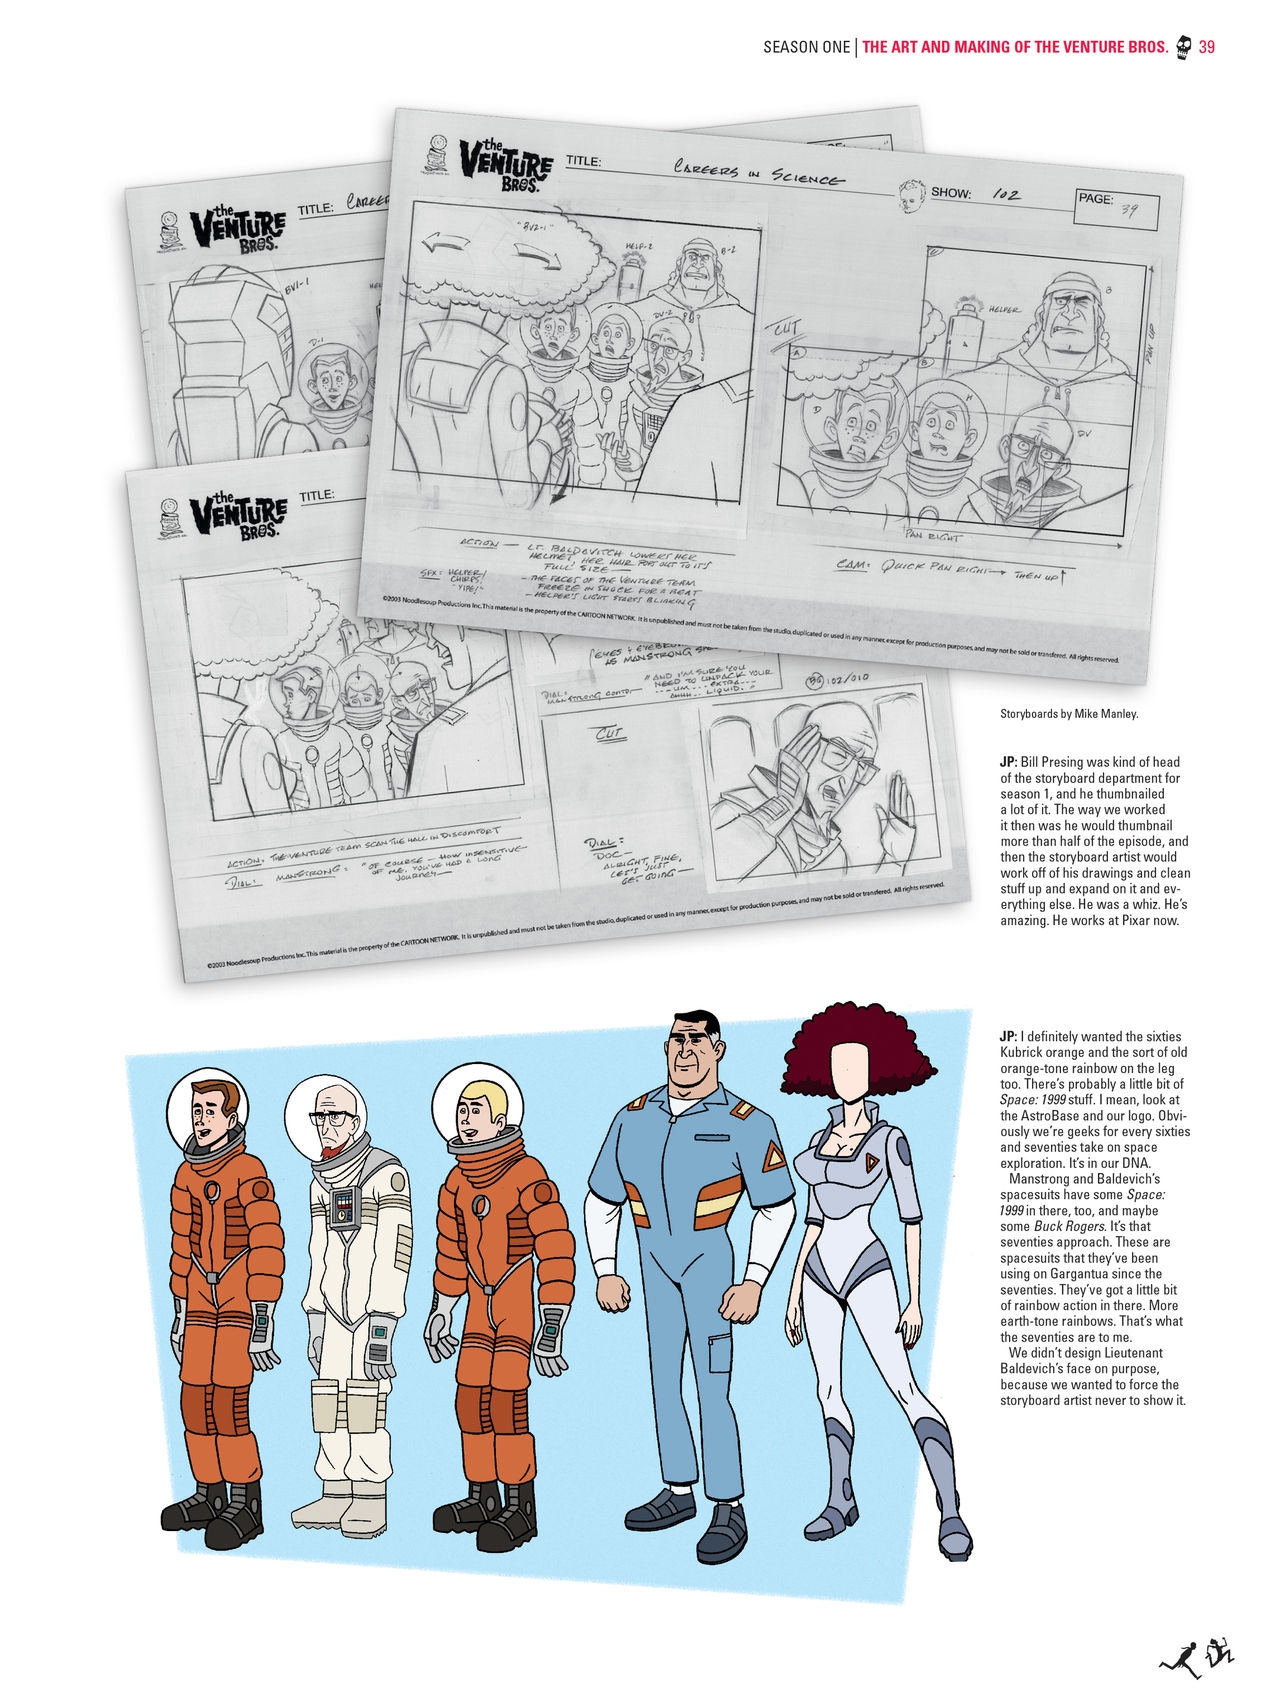 Go Team Venture! - The Art and Making of the Venture Bros 38